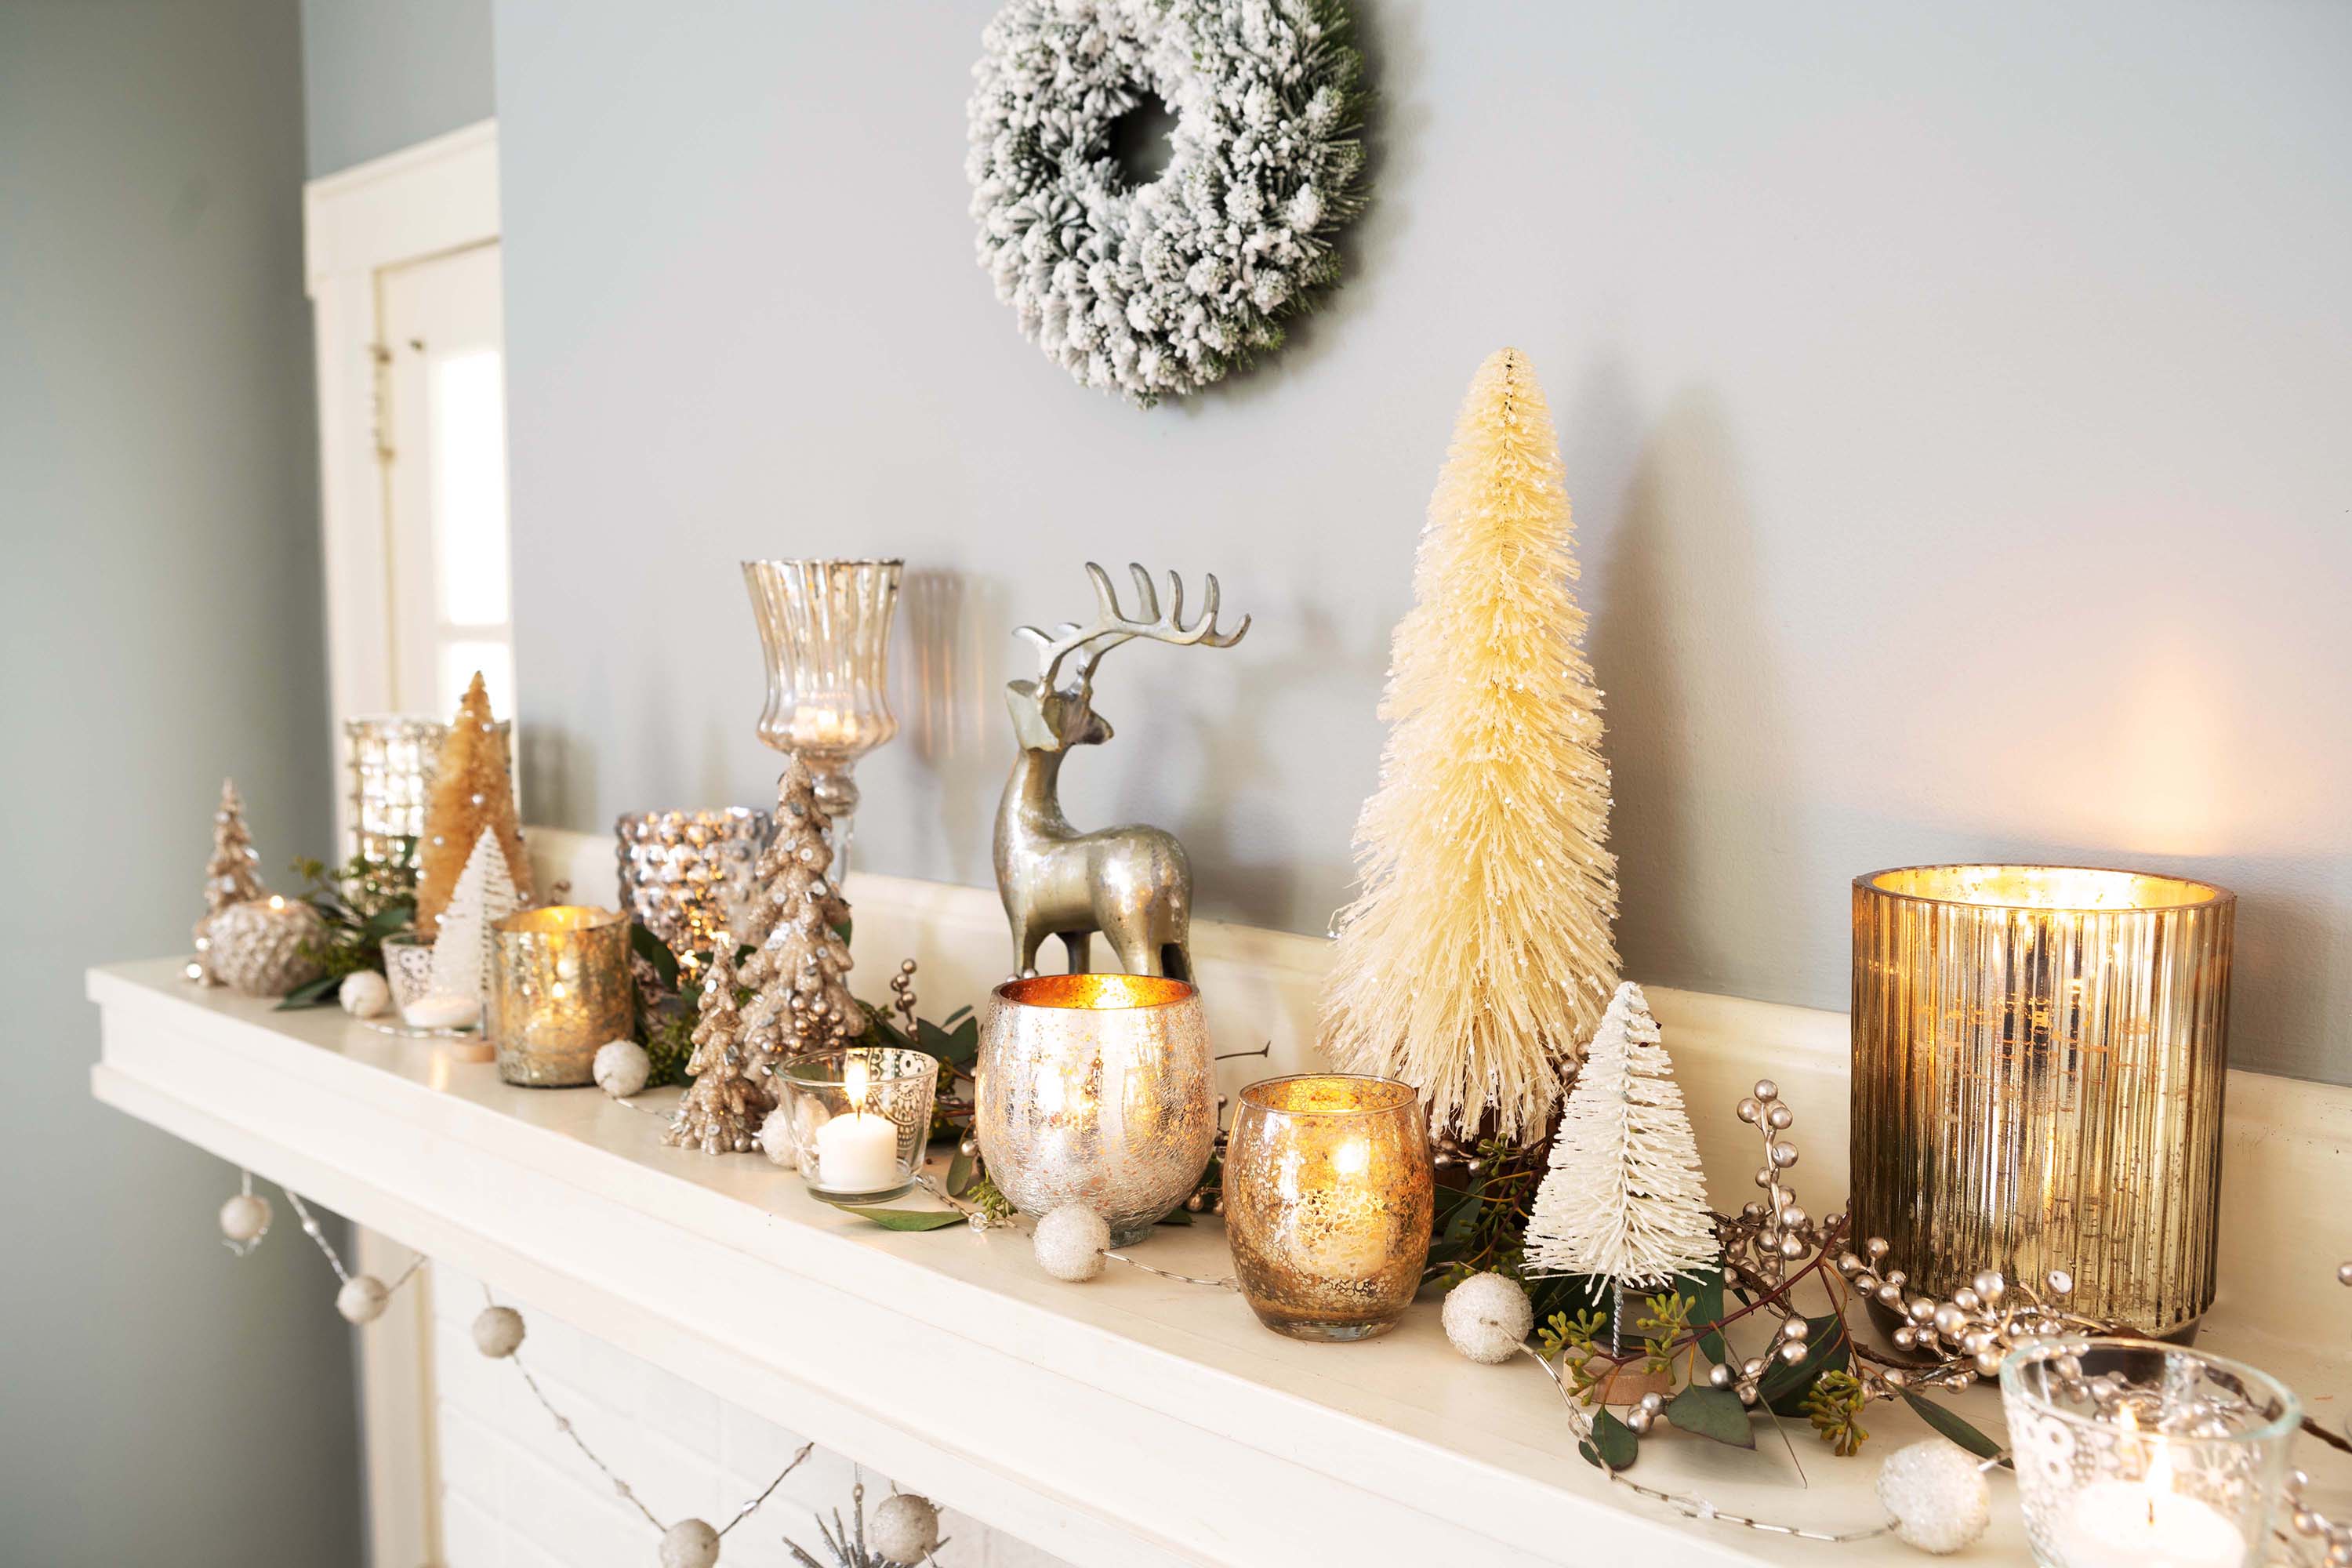 A decorated fireplace mantel